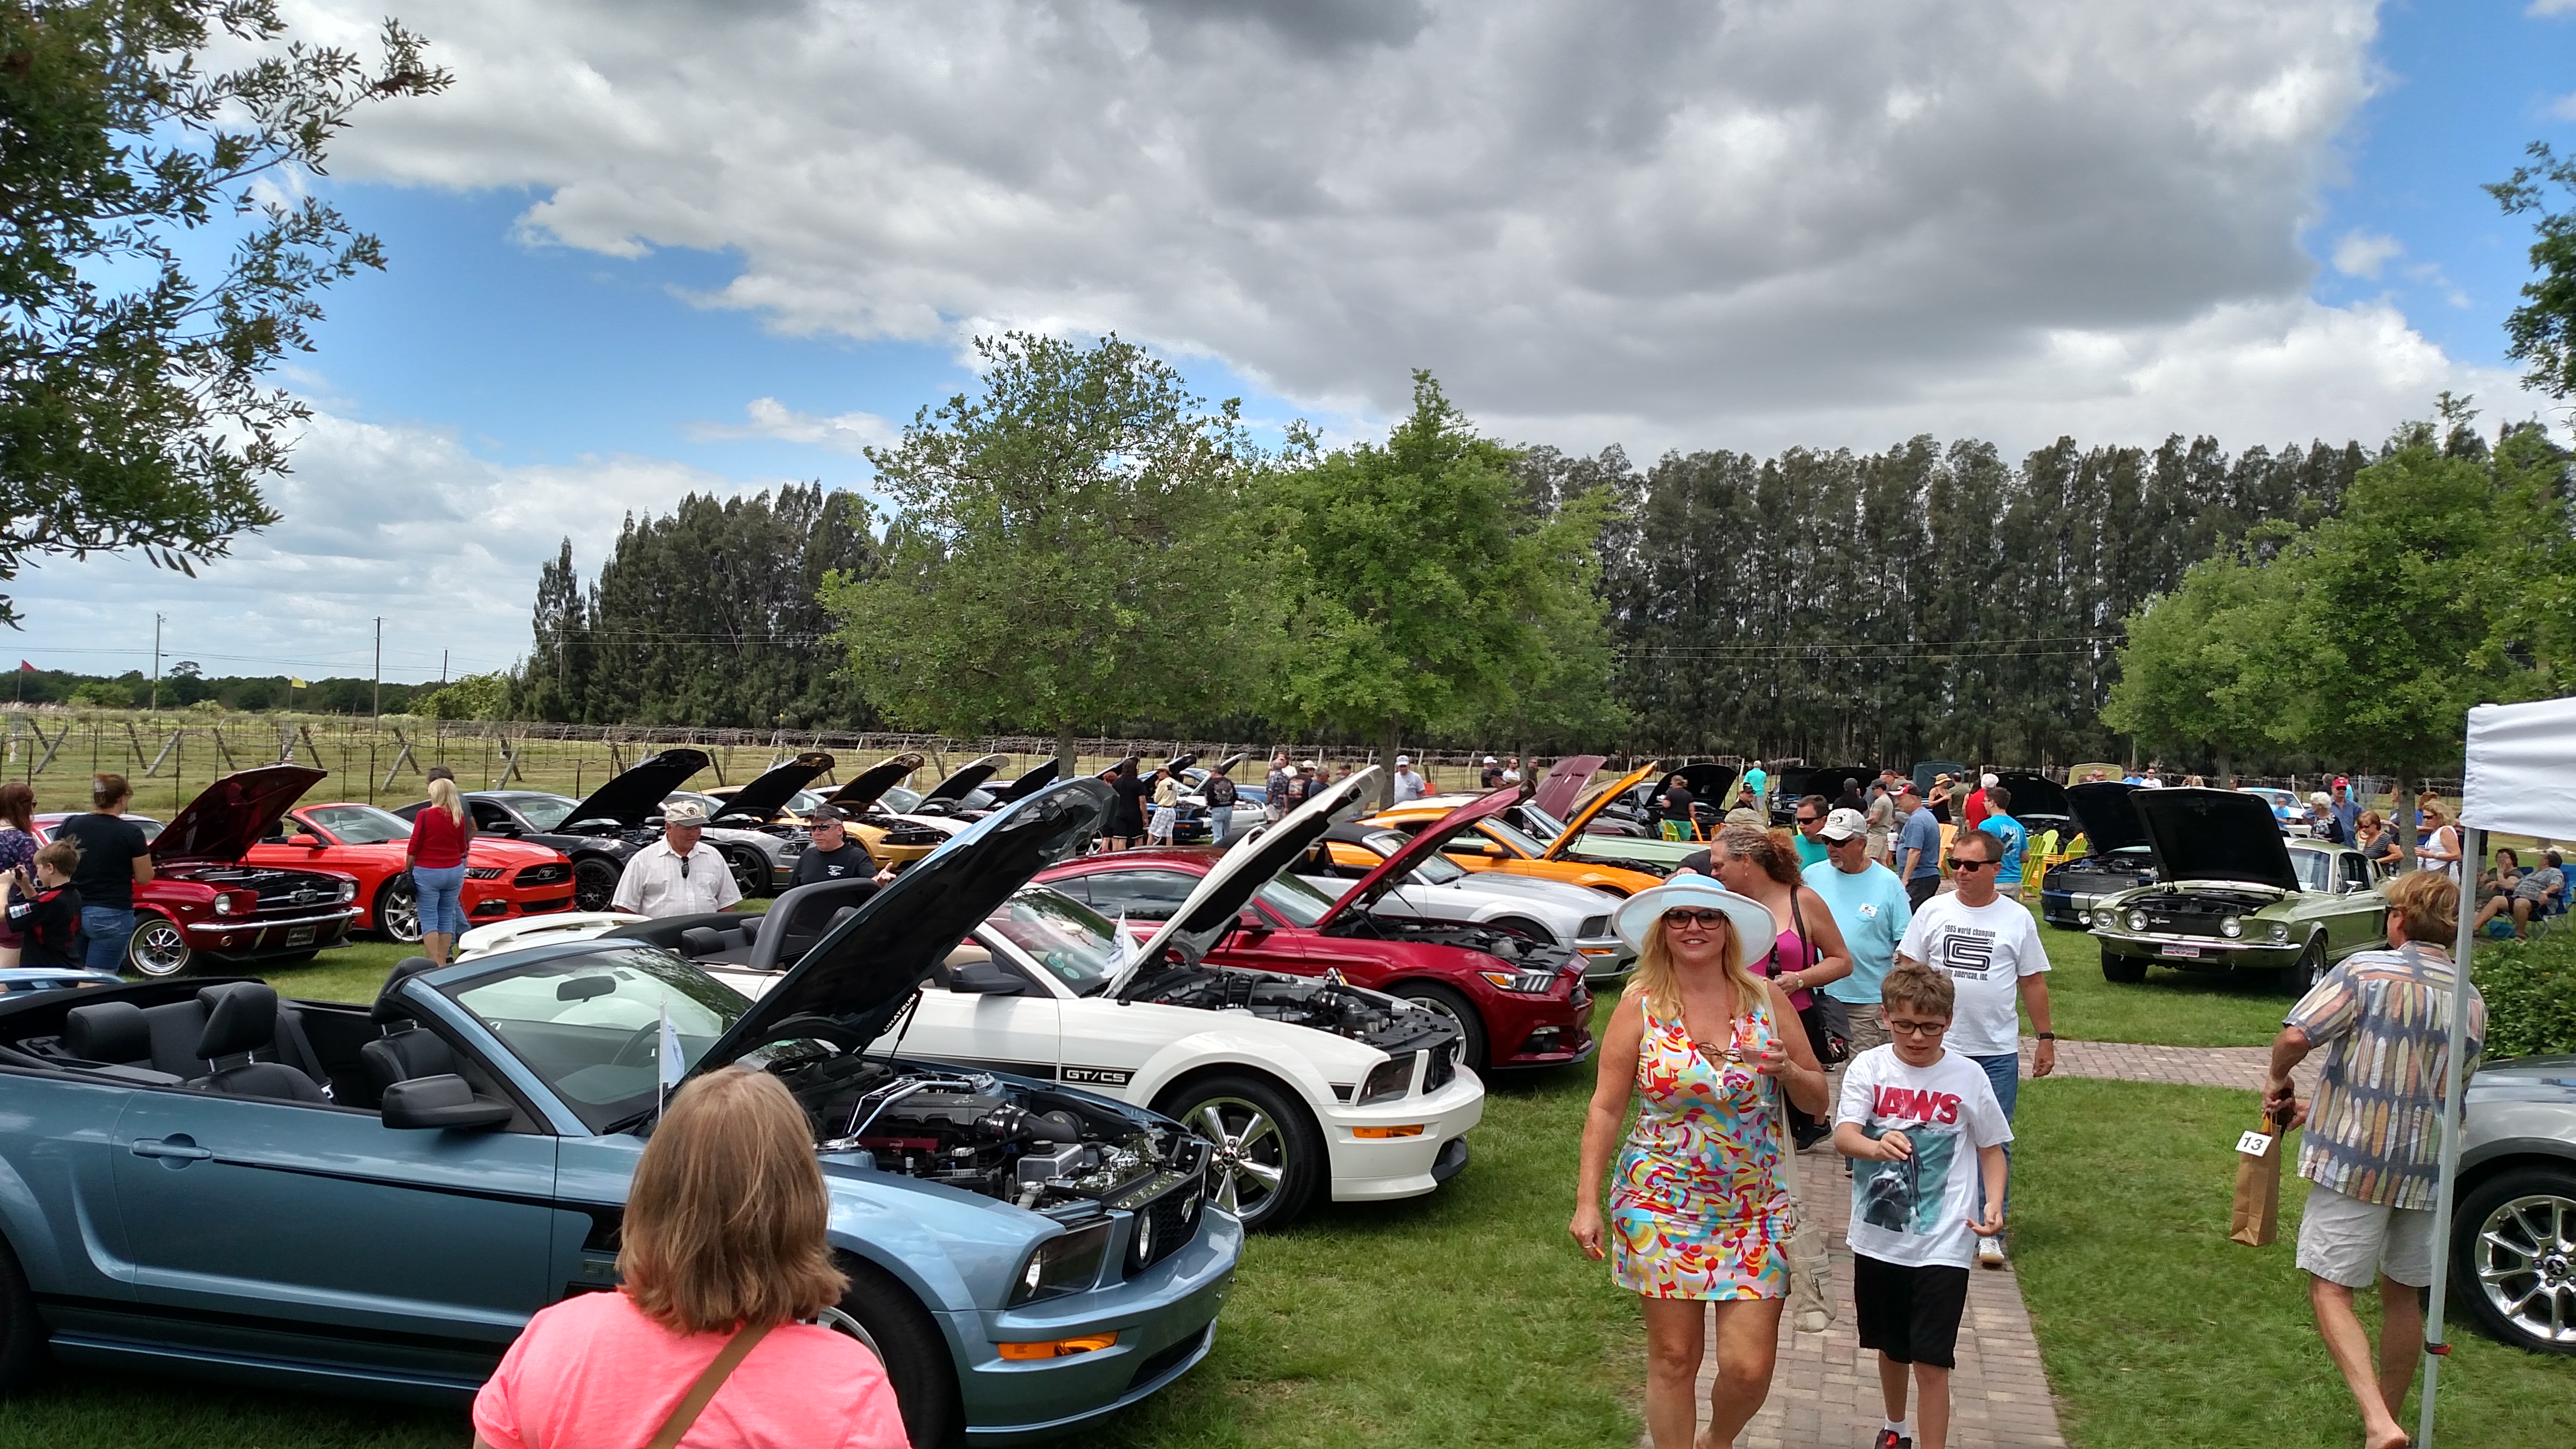 Celebrating 60 Years of Mustangs with a HORSIN' AROUND THE VINEYARD Mustang & Ford Car Show AND TRIBUTE TO THE MUSIC OF PHIL COLLINS & GENESIS!!